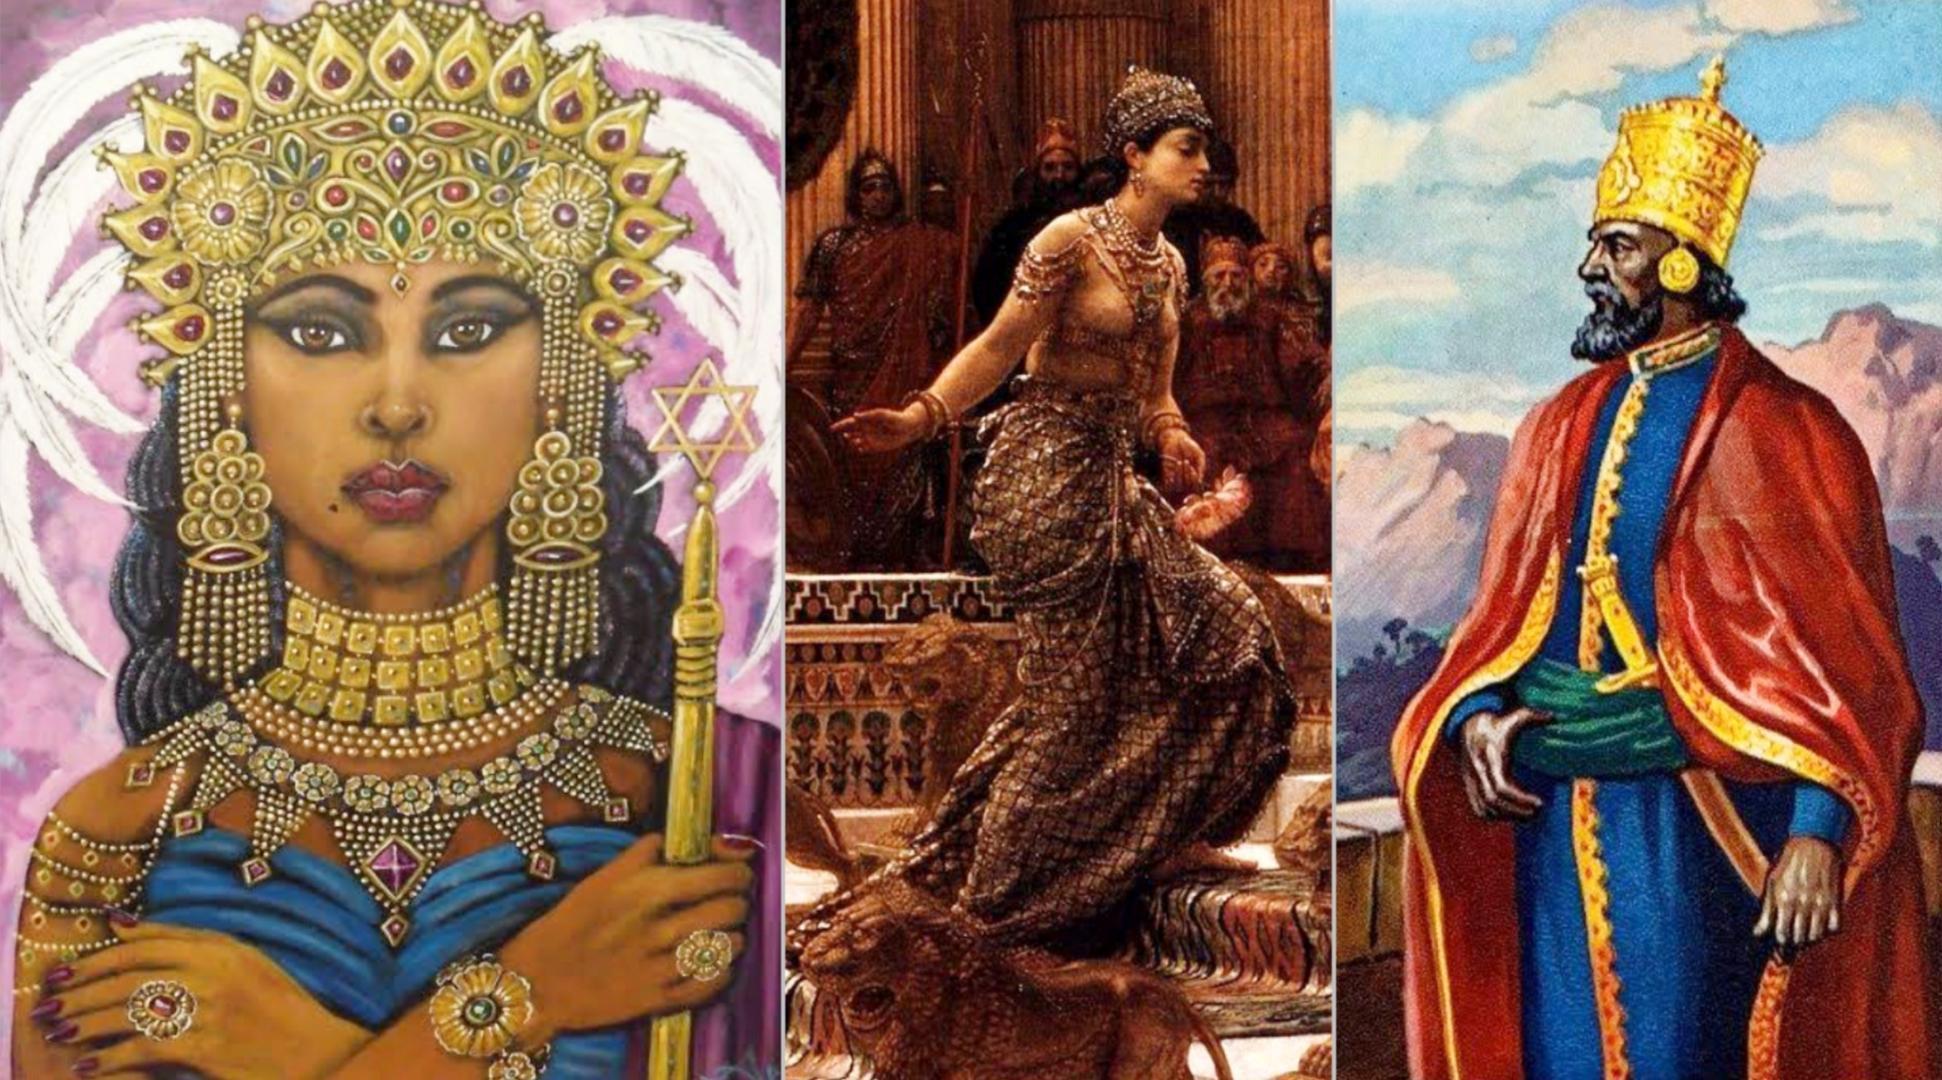 Queen of Sheba: African queen who visited King Solomon to verify his wisdom